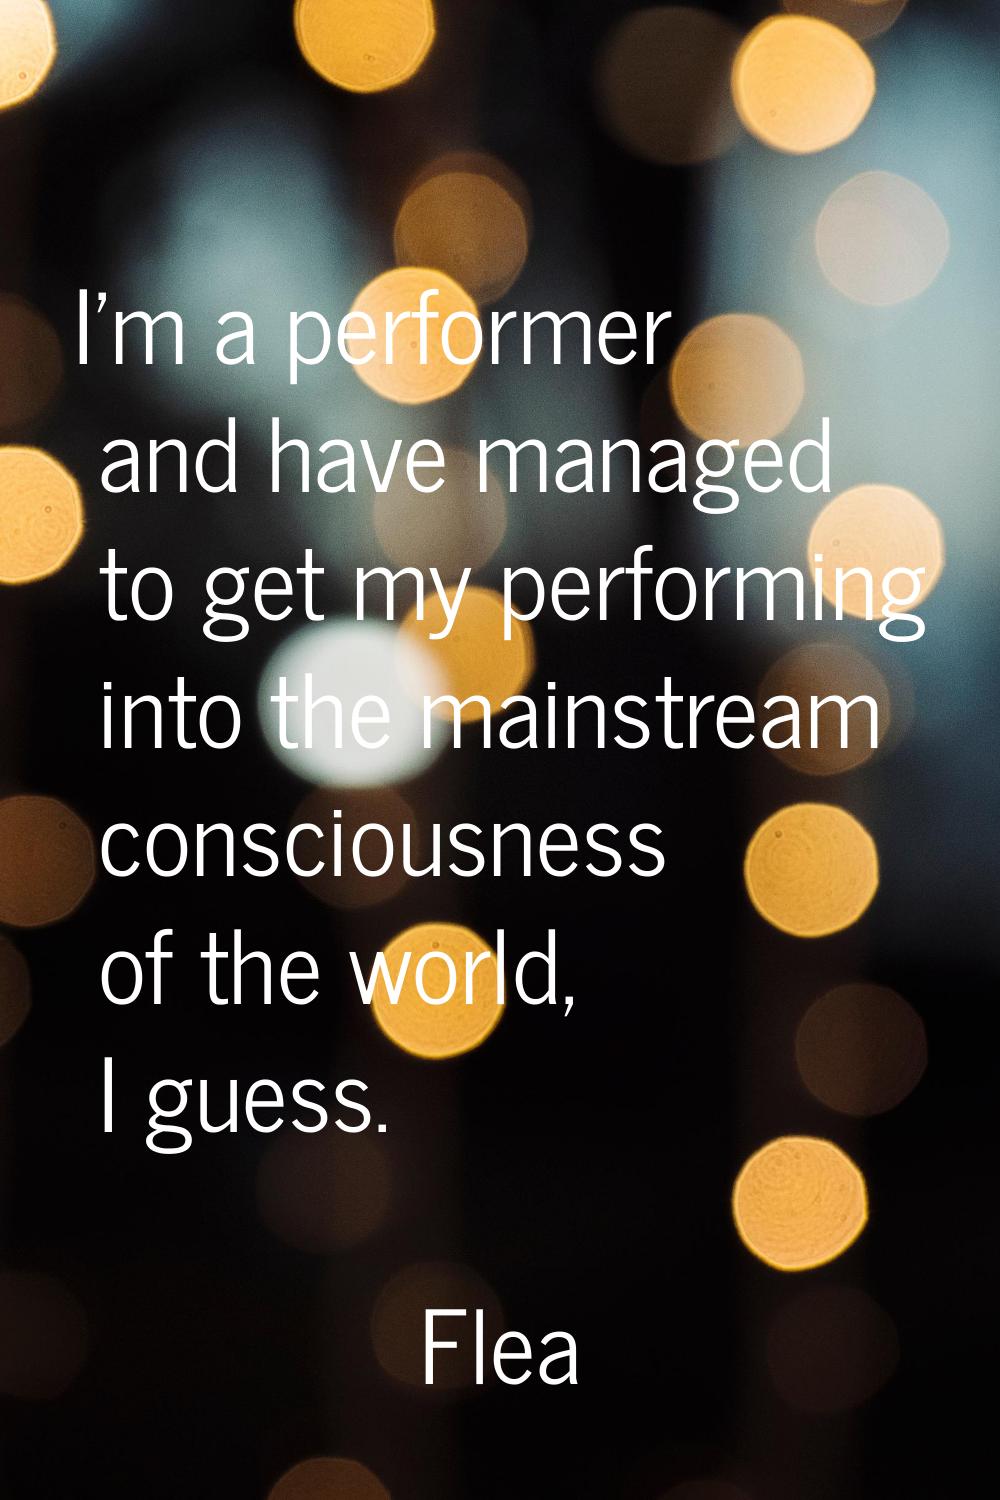 I'm a performer and have managed to get my performing into the mainstream consciousness of the worl